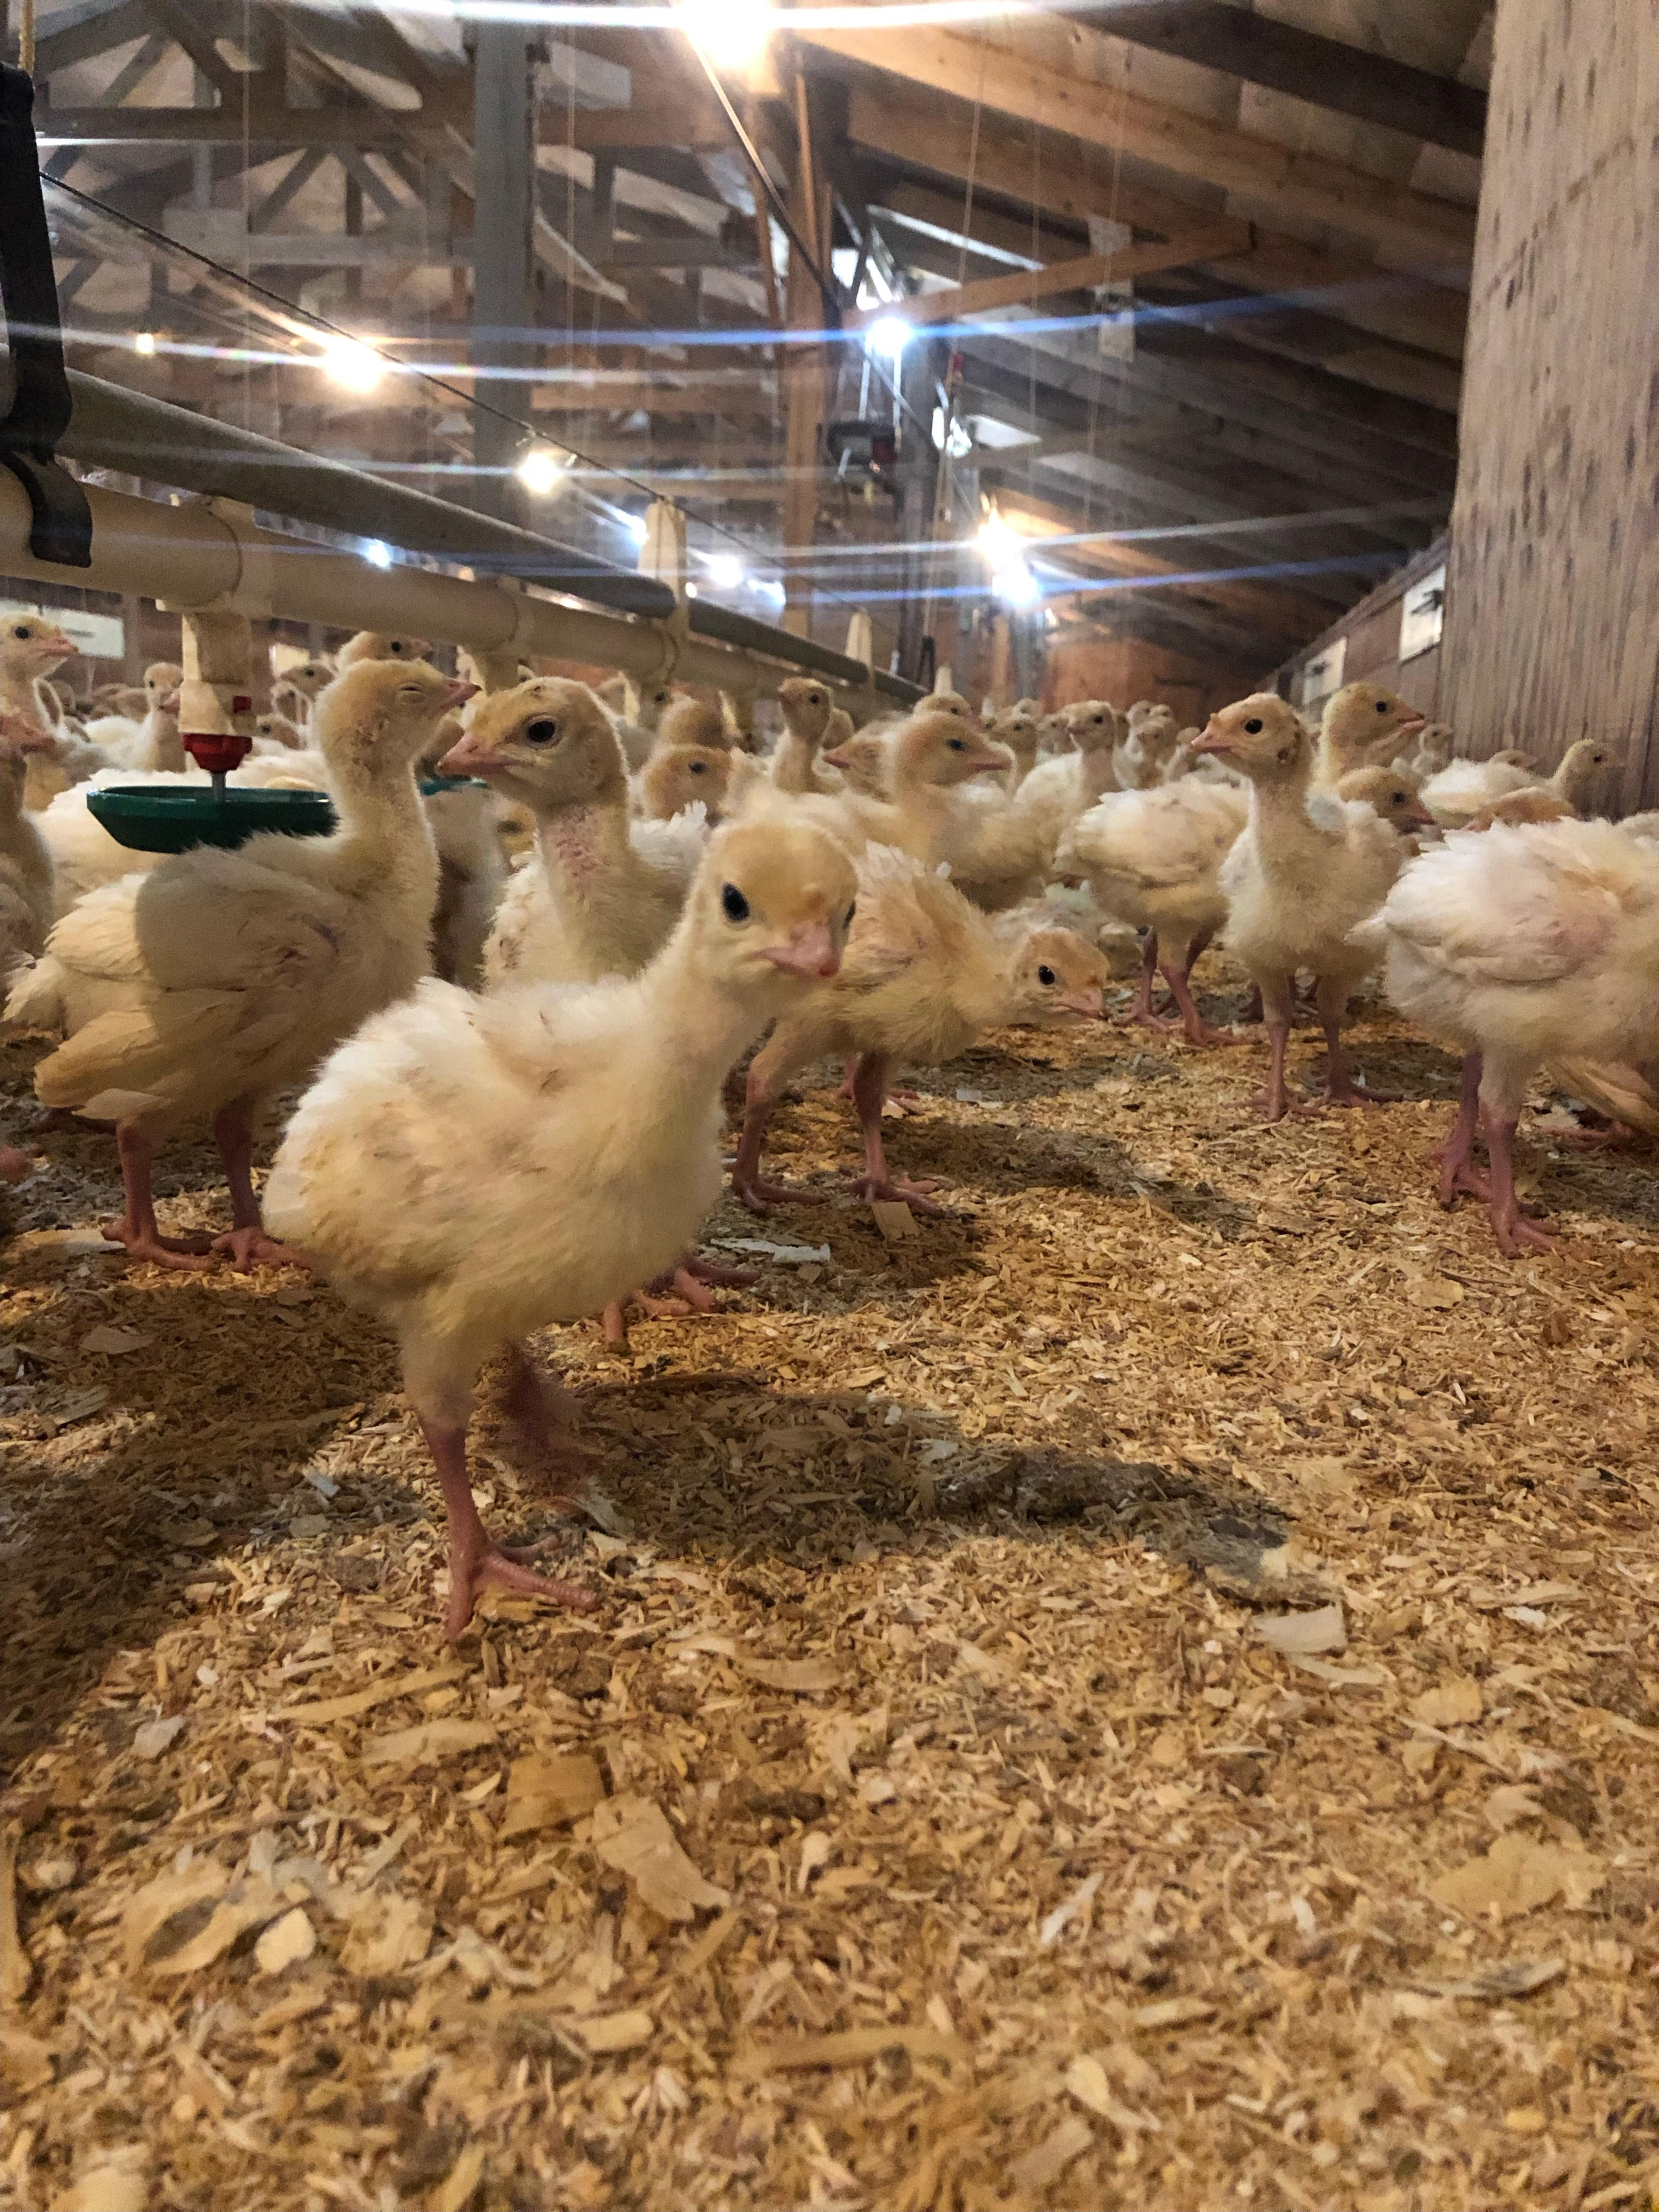 Morning Ag News, April 4, 2022: One turkey grower talks biosecurity efforts to protect their birds from HPAI